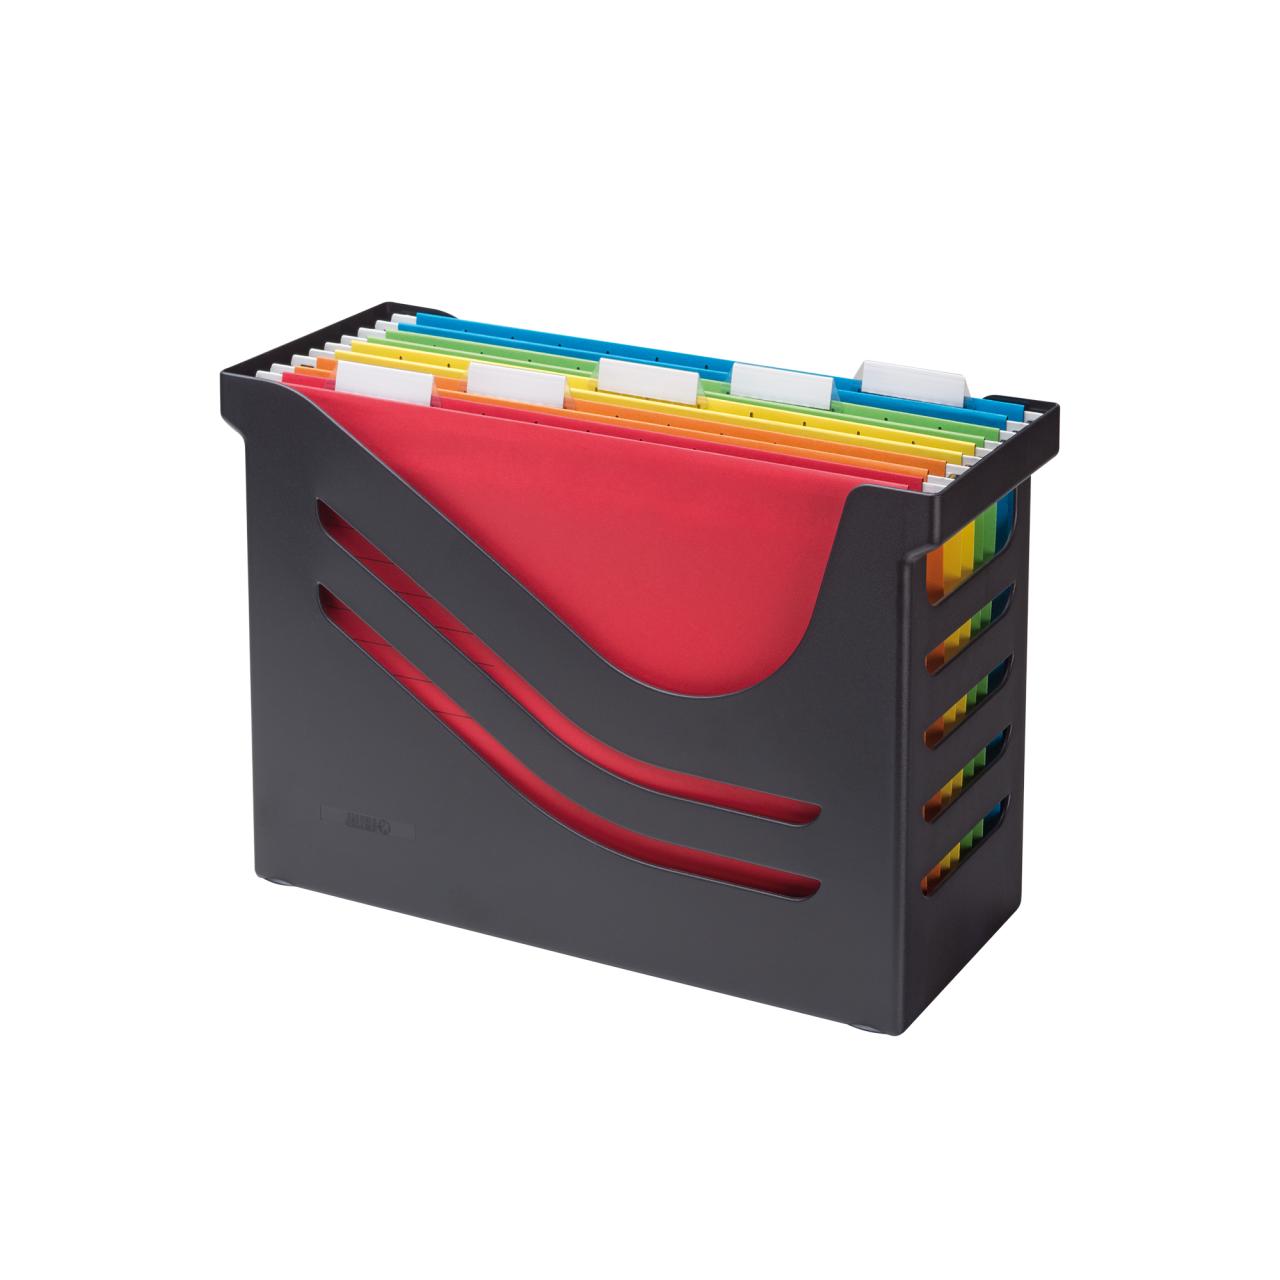 Re-Solution Suspension File Box with 5 Suspension Files, 100% Recycled 